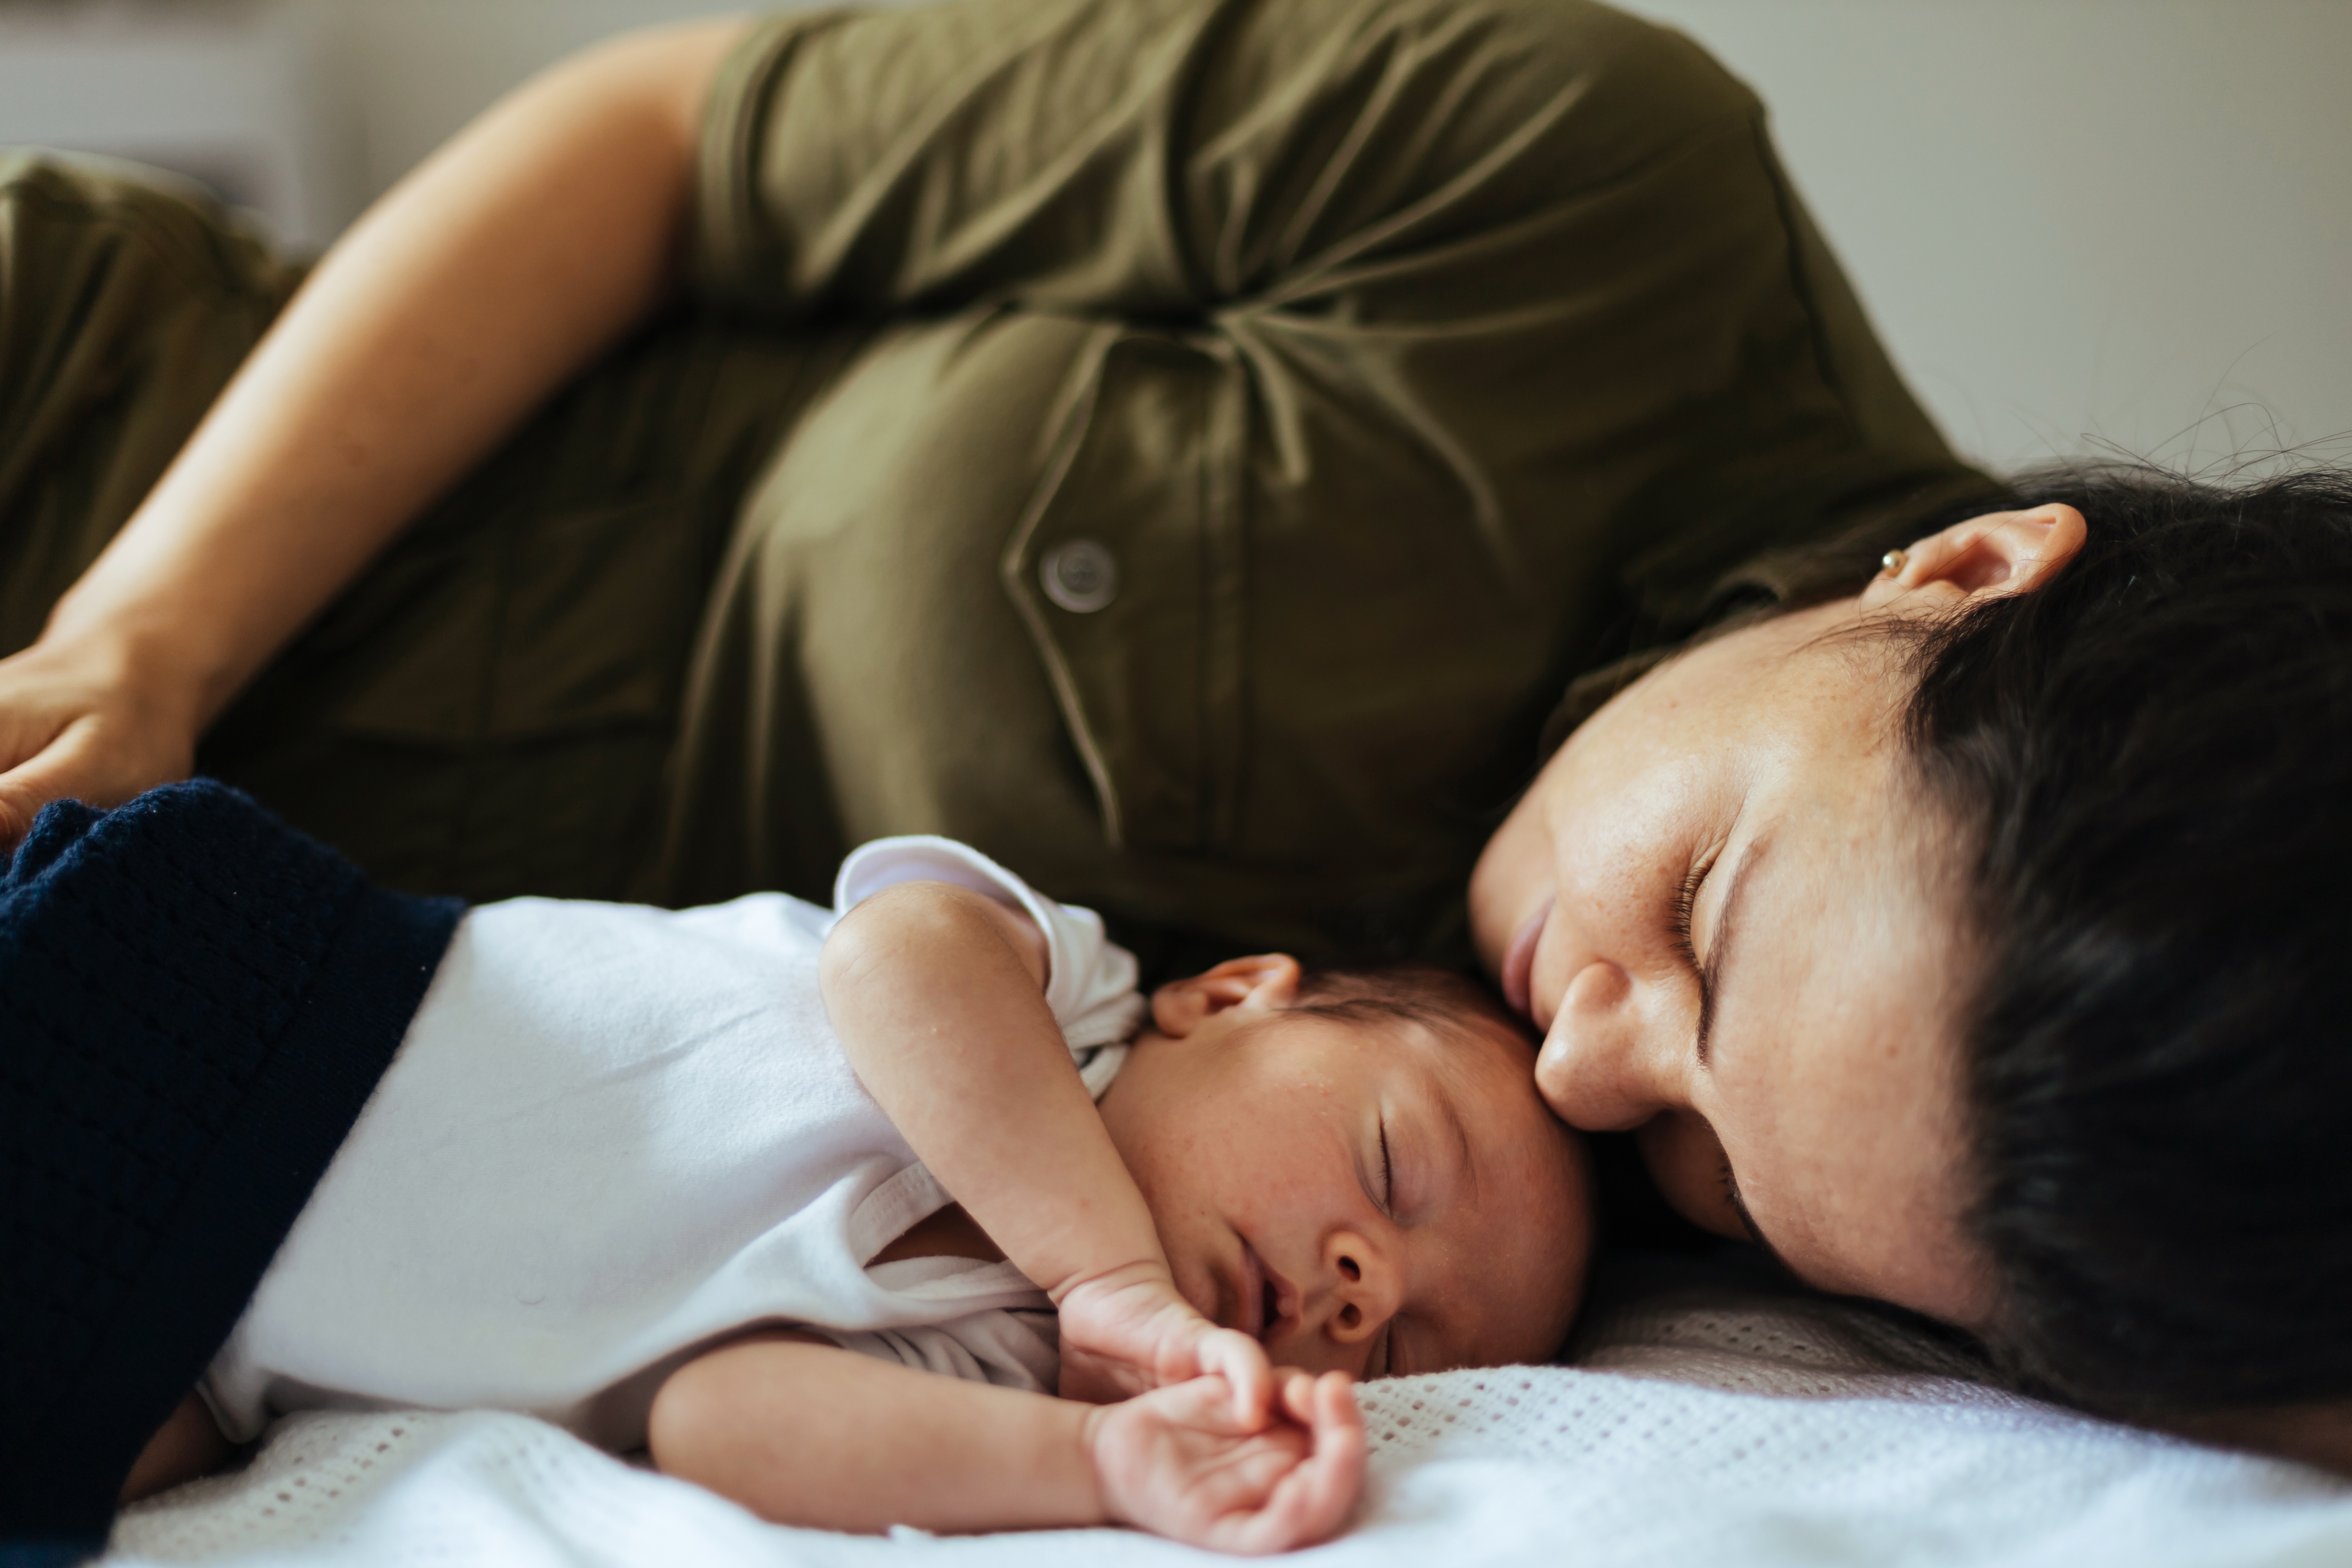 A woman sleeping with a baby | Source: Shutterstock